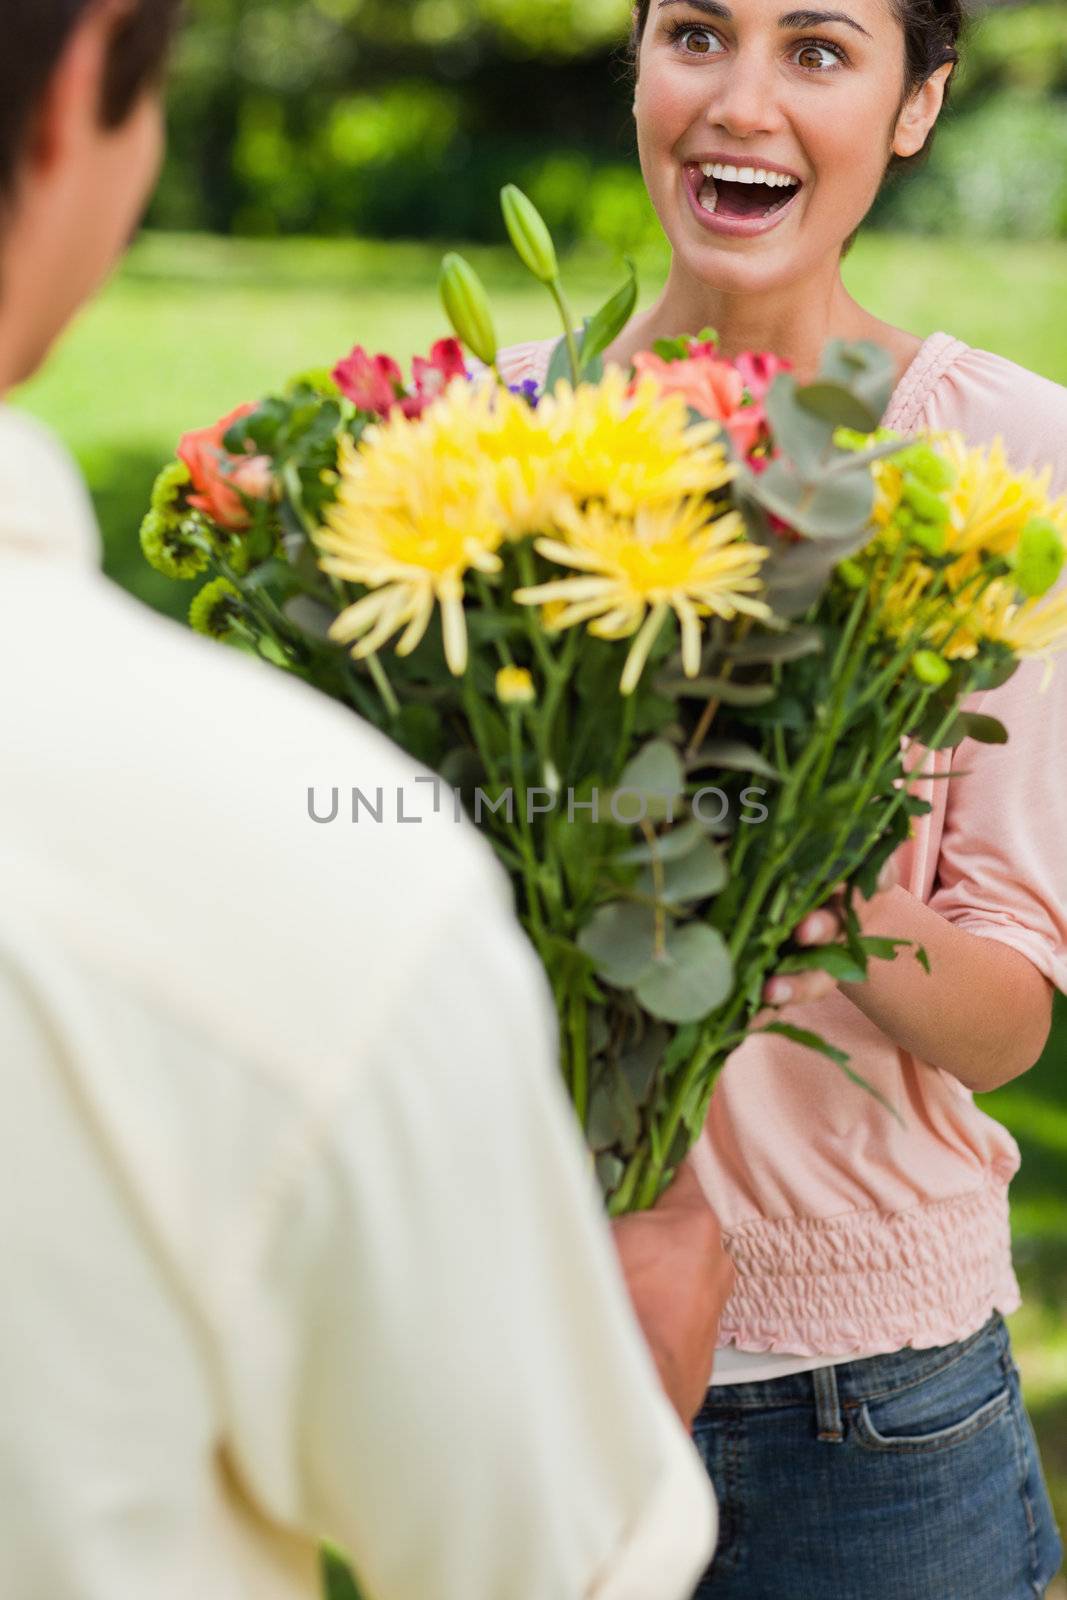 Woman surprised as she is presented with flowers by her friend by Wavebreakmedia